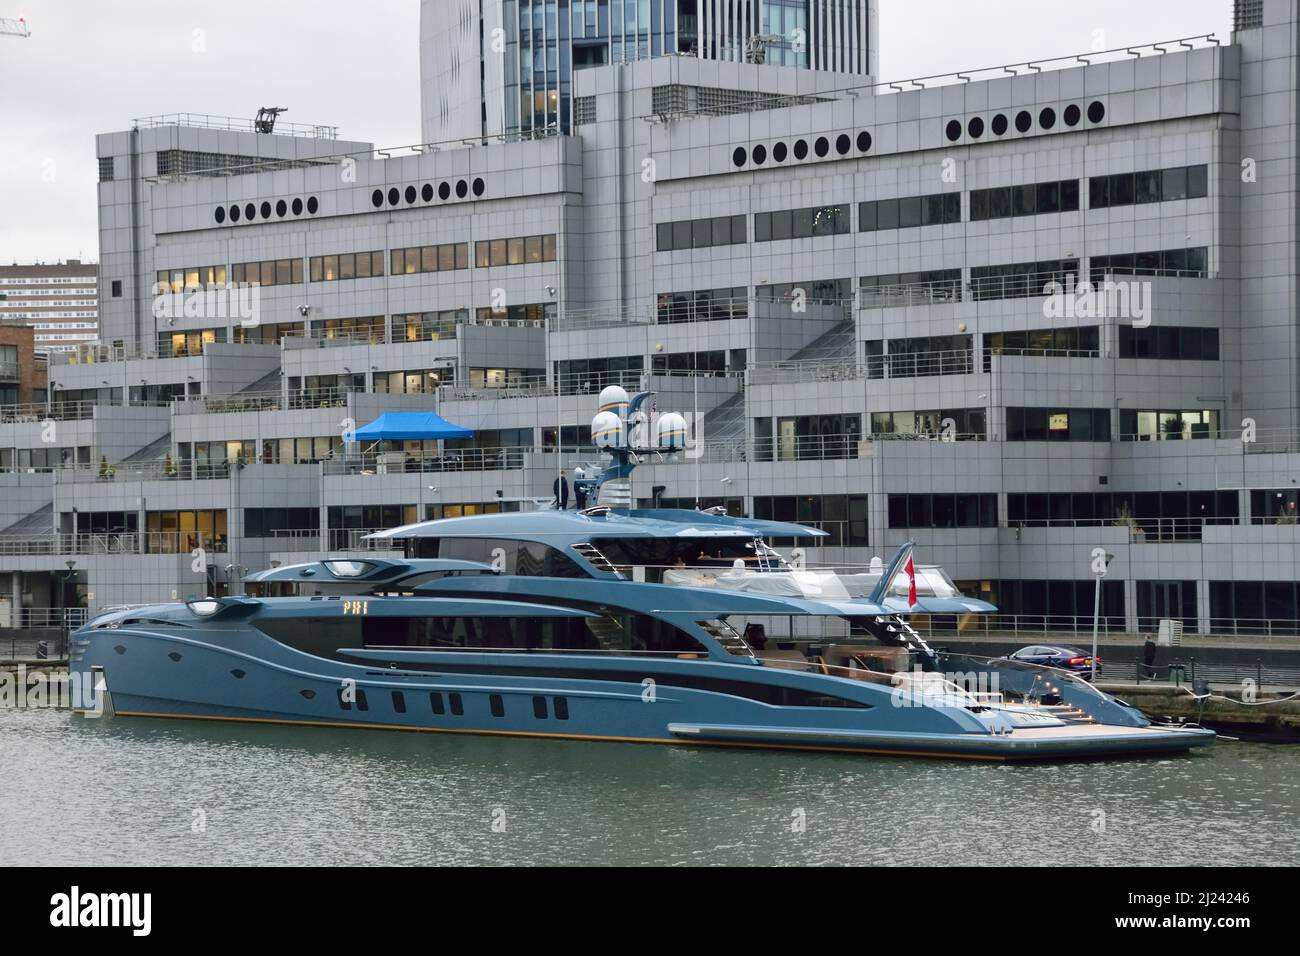 Superyacht PHI mooring in West India Dock, Canary Wharf, London Stock Photo